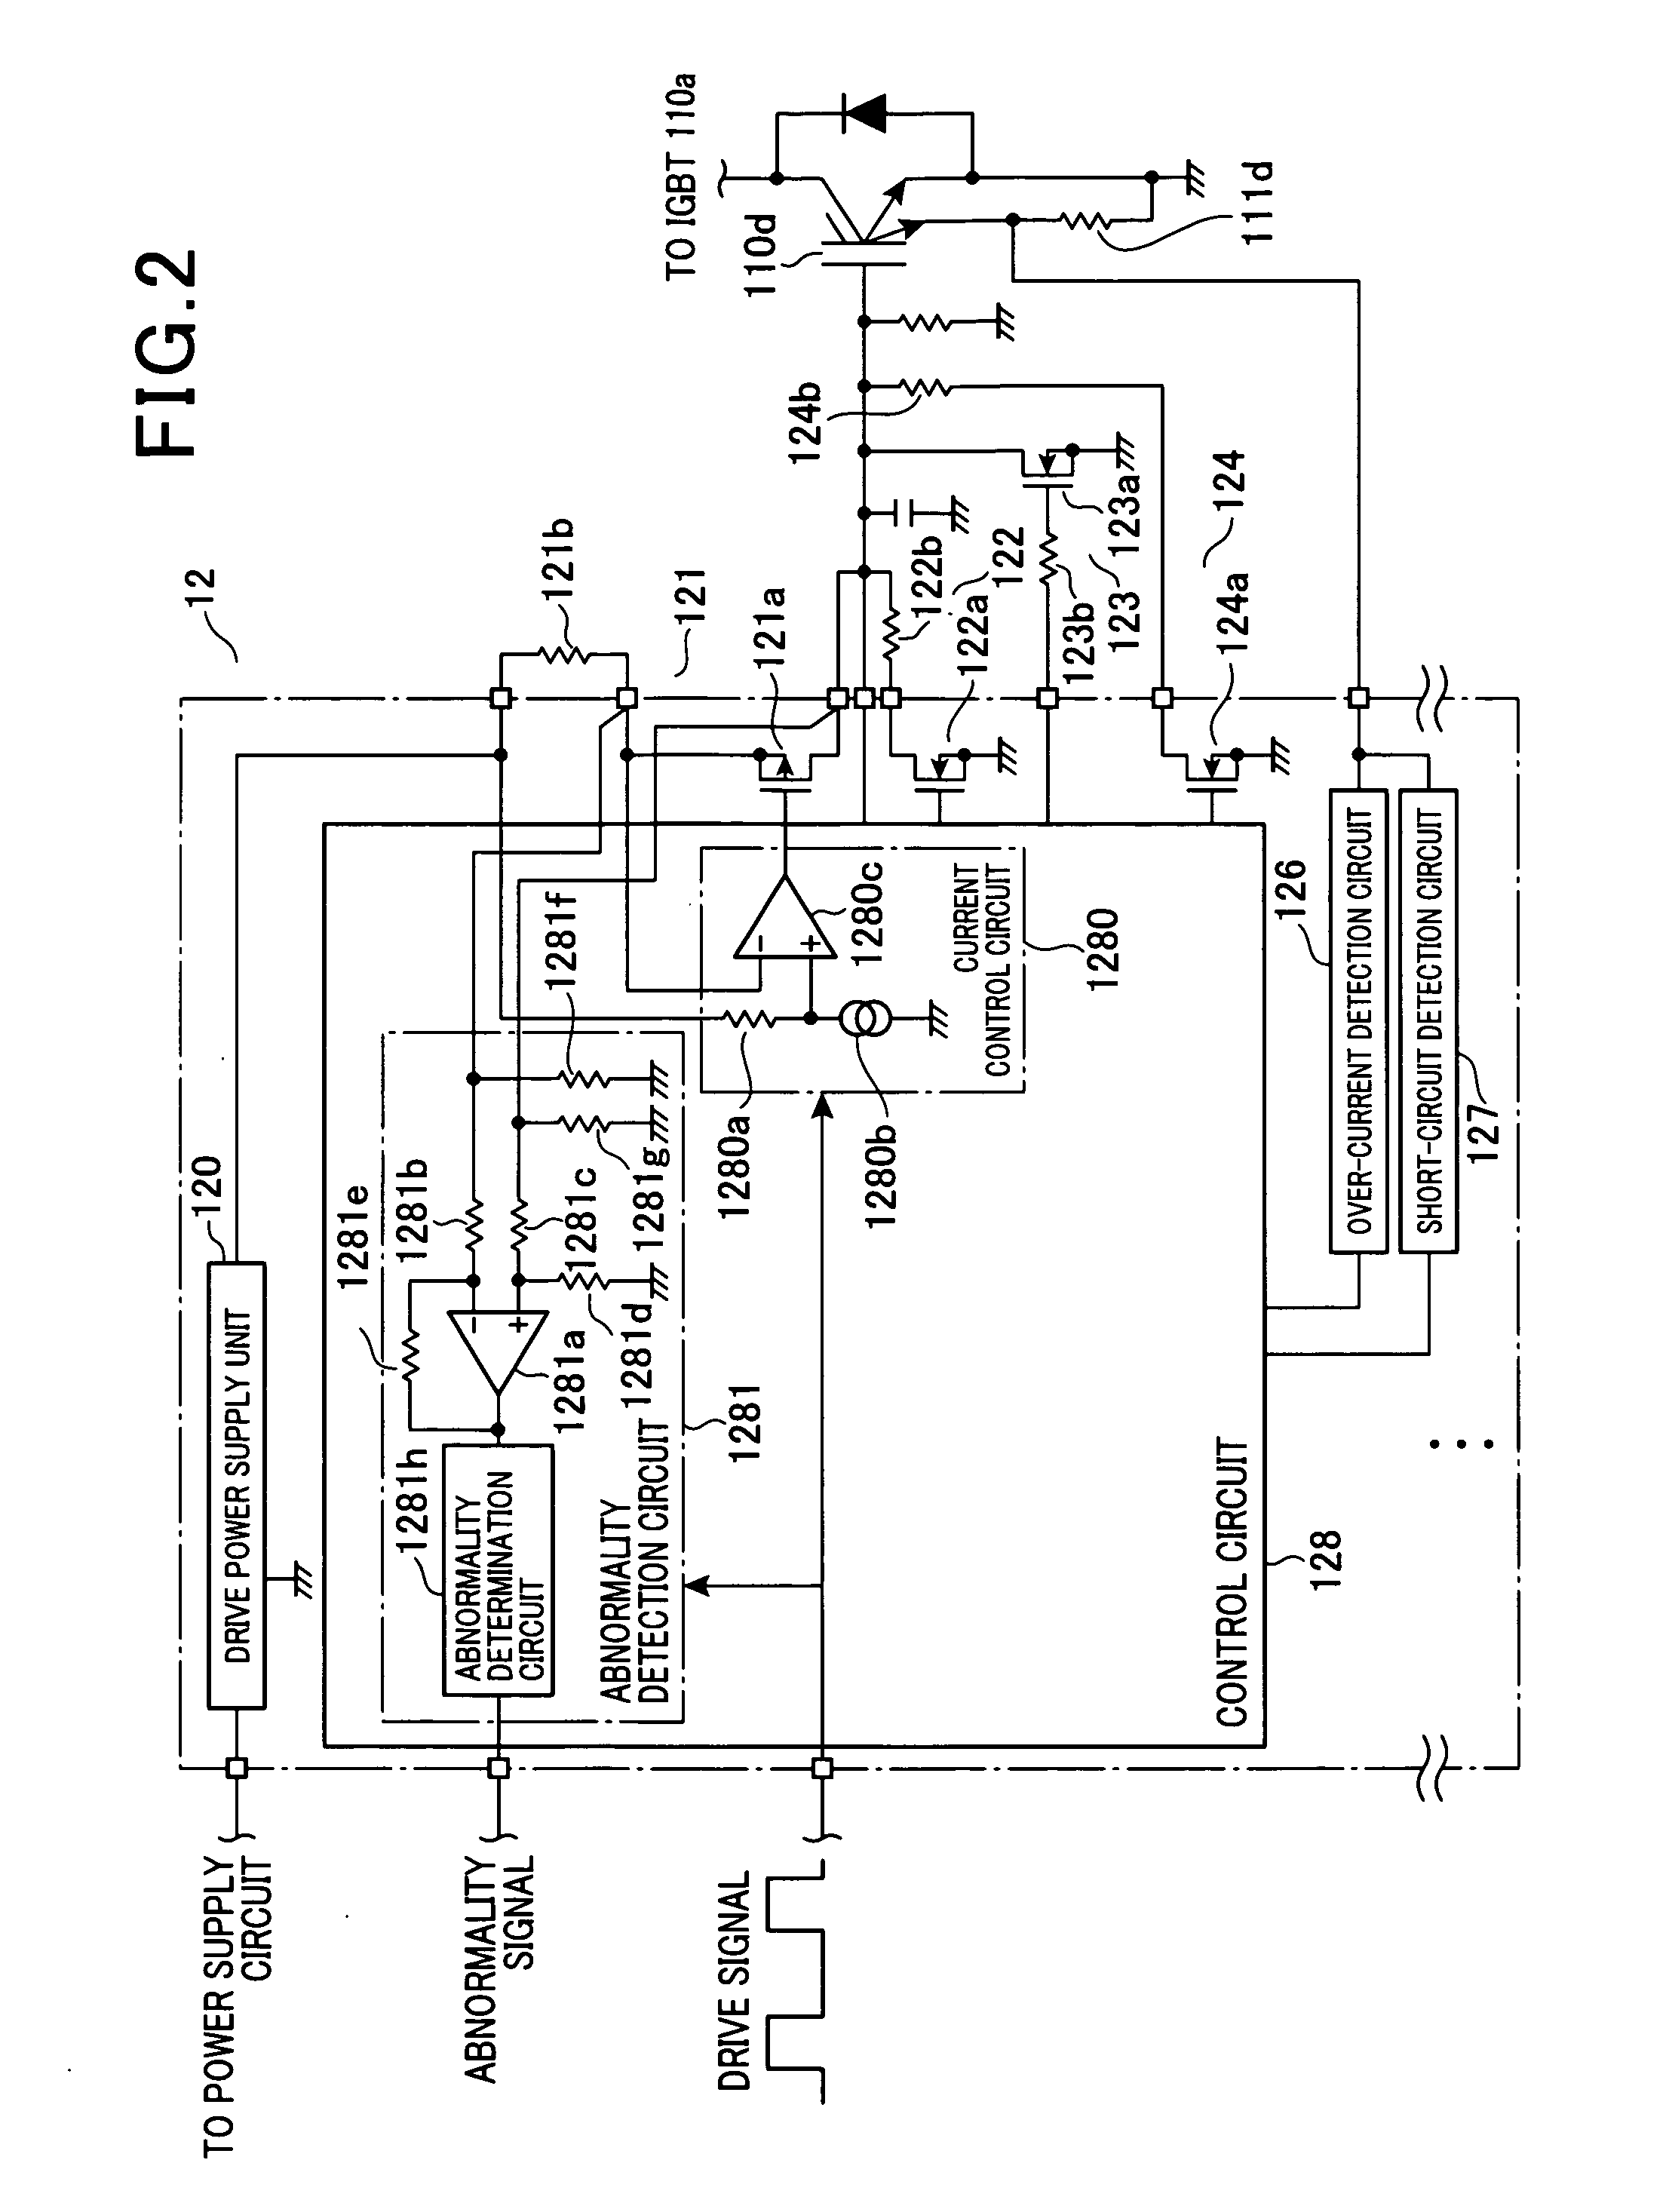 Electronic control apparatus having switching element and drive circuit